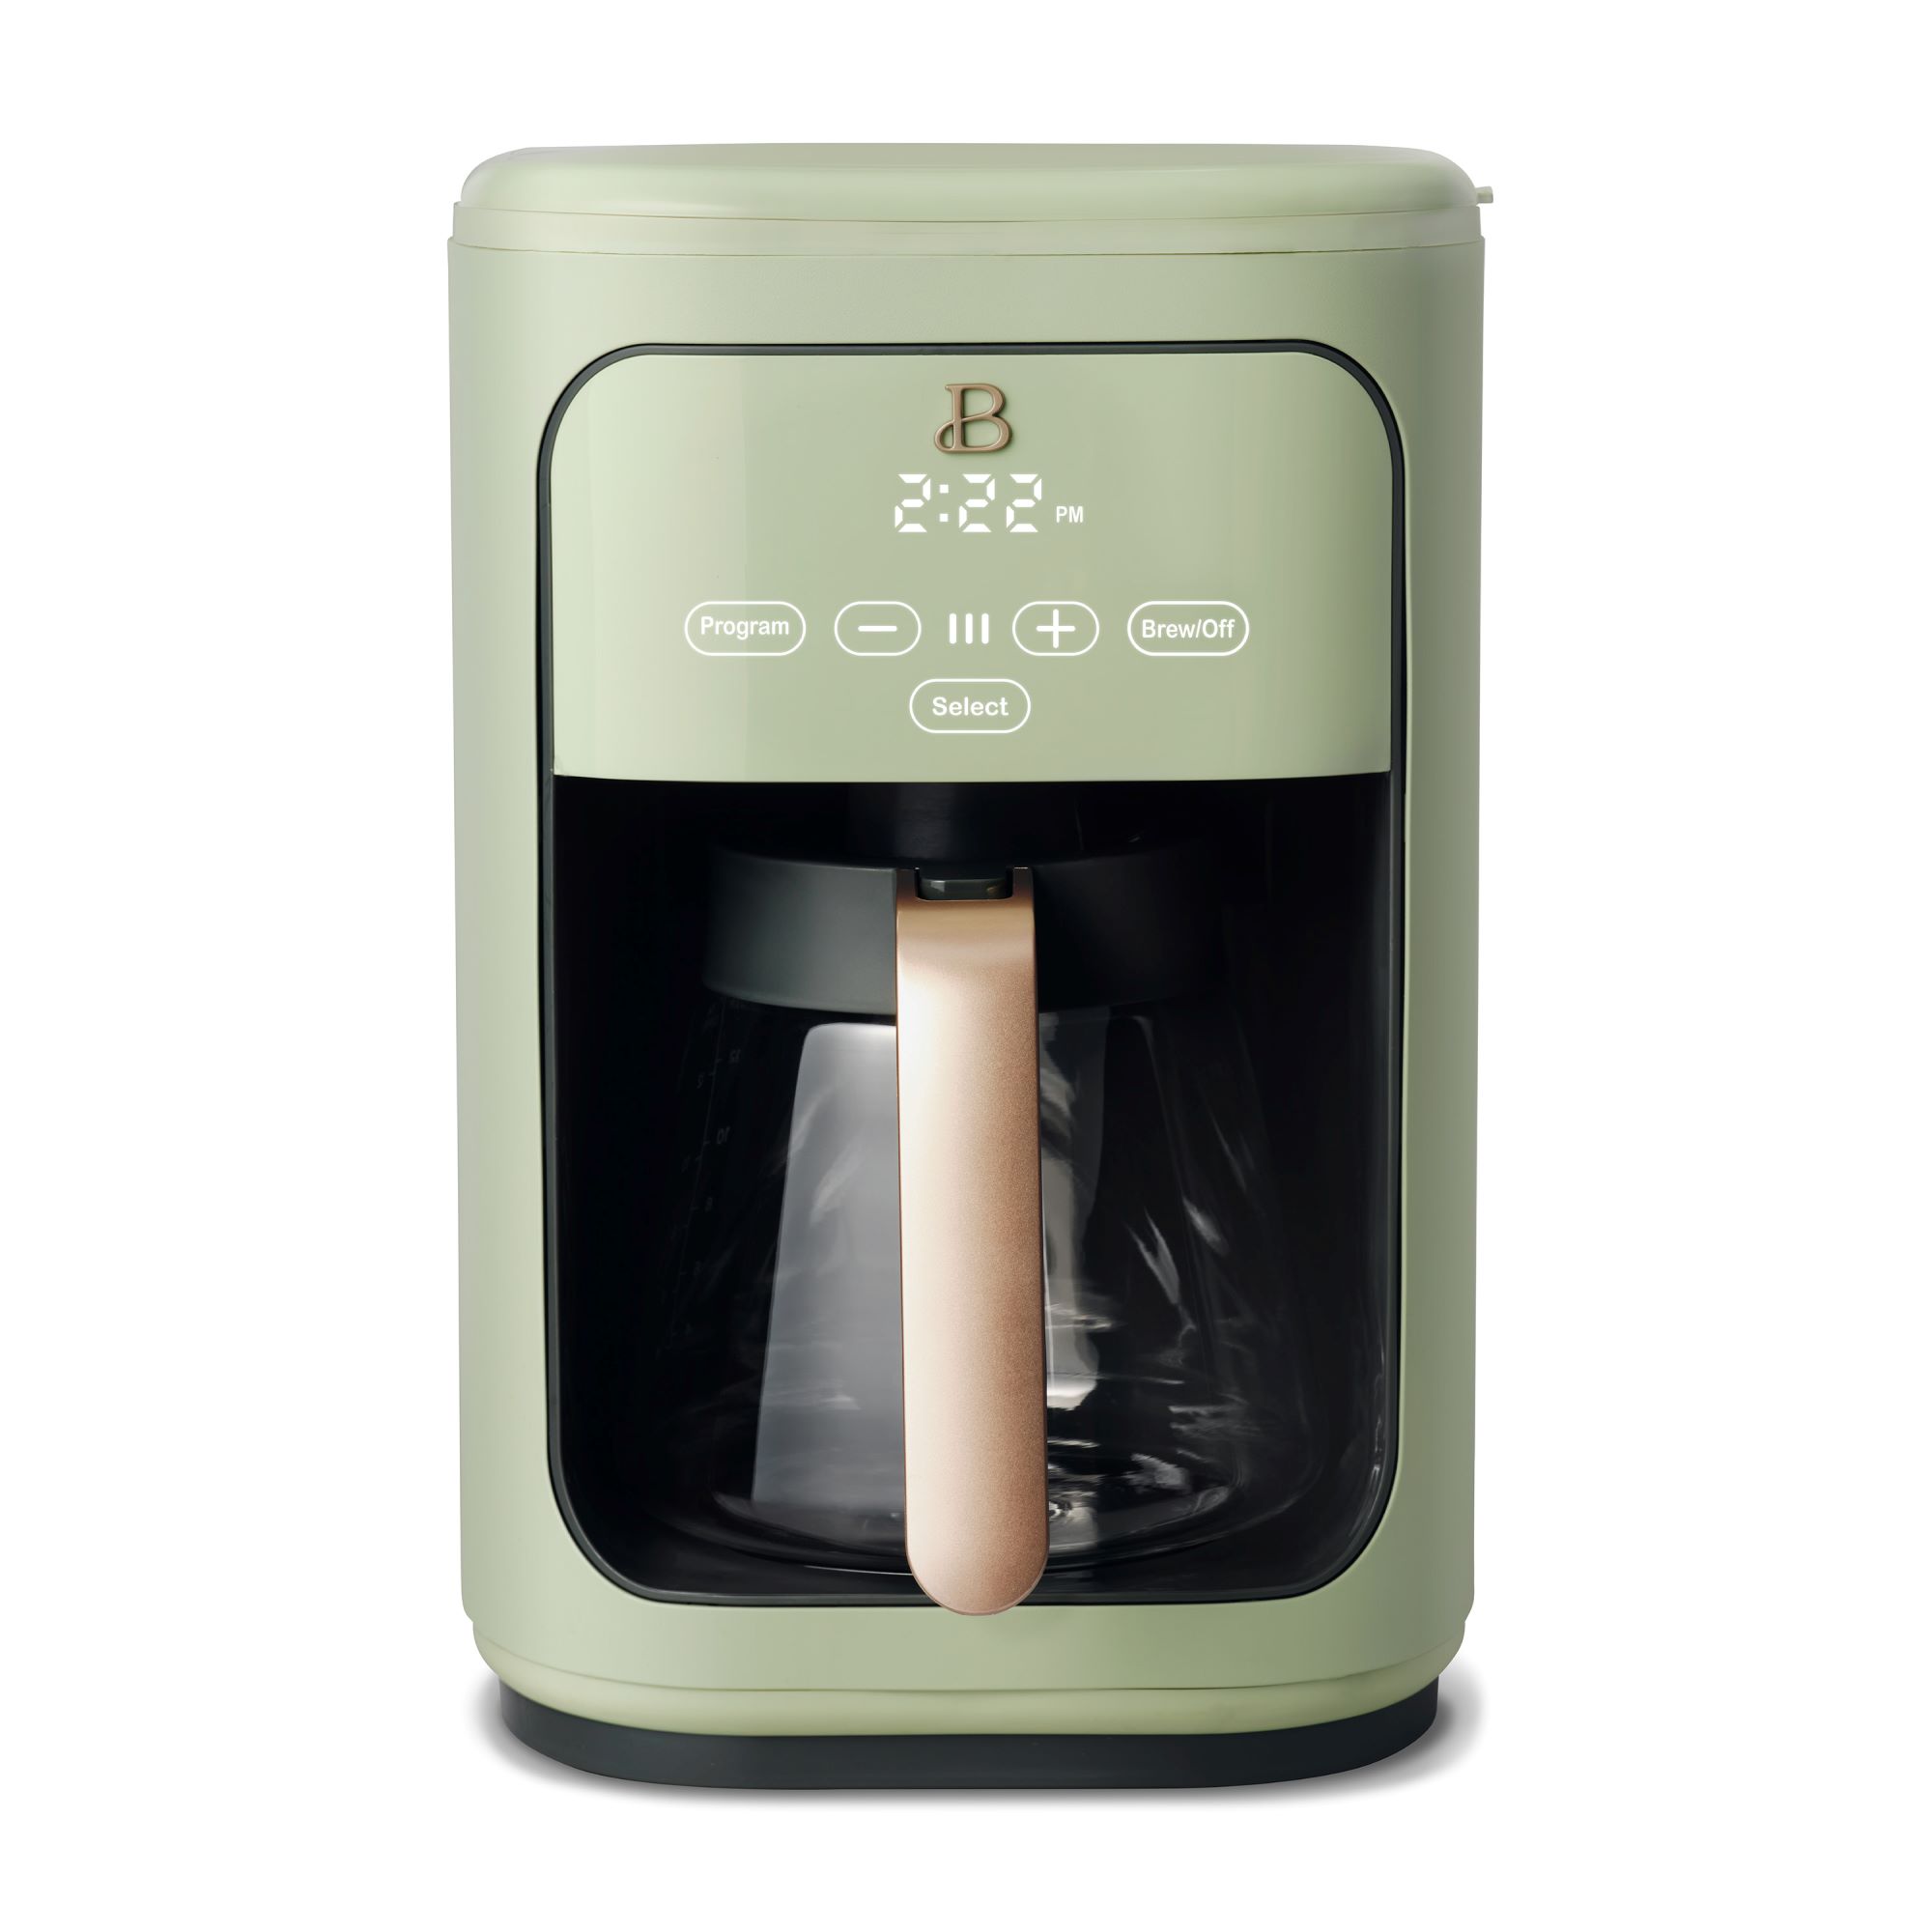 Beautiful 14-Cup Programmable Drip Coffee Maker with Touch-Activated Display, Sage Green by Drew Barrymore - image 1 of 10